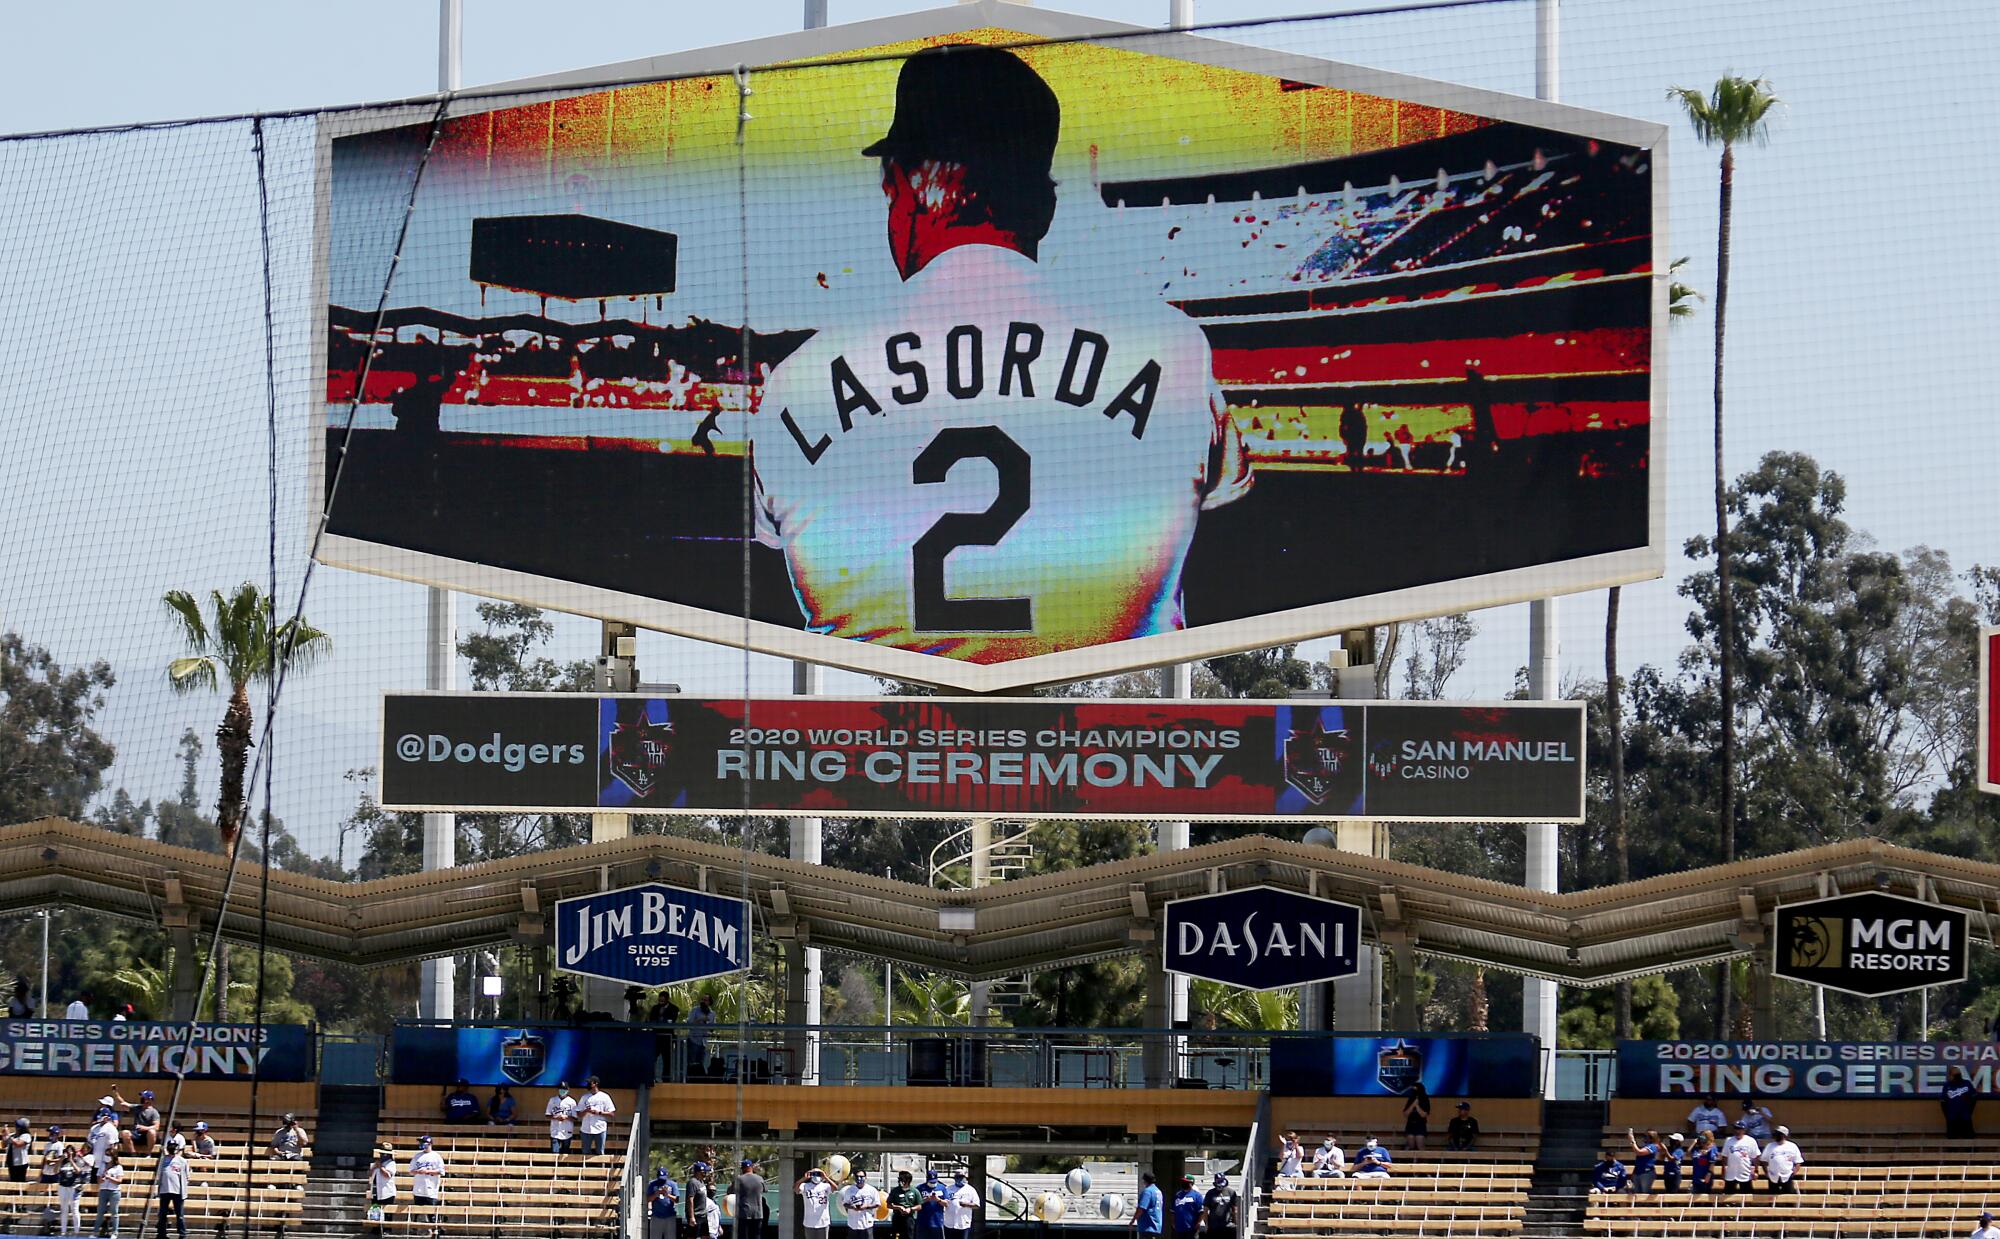 The Dodgers pay tribute to former manager Tommy Lasorda, who died in January, before Friday's game.